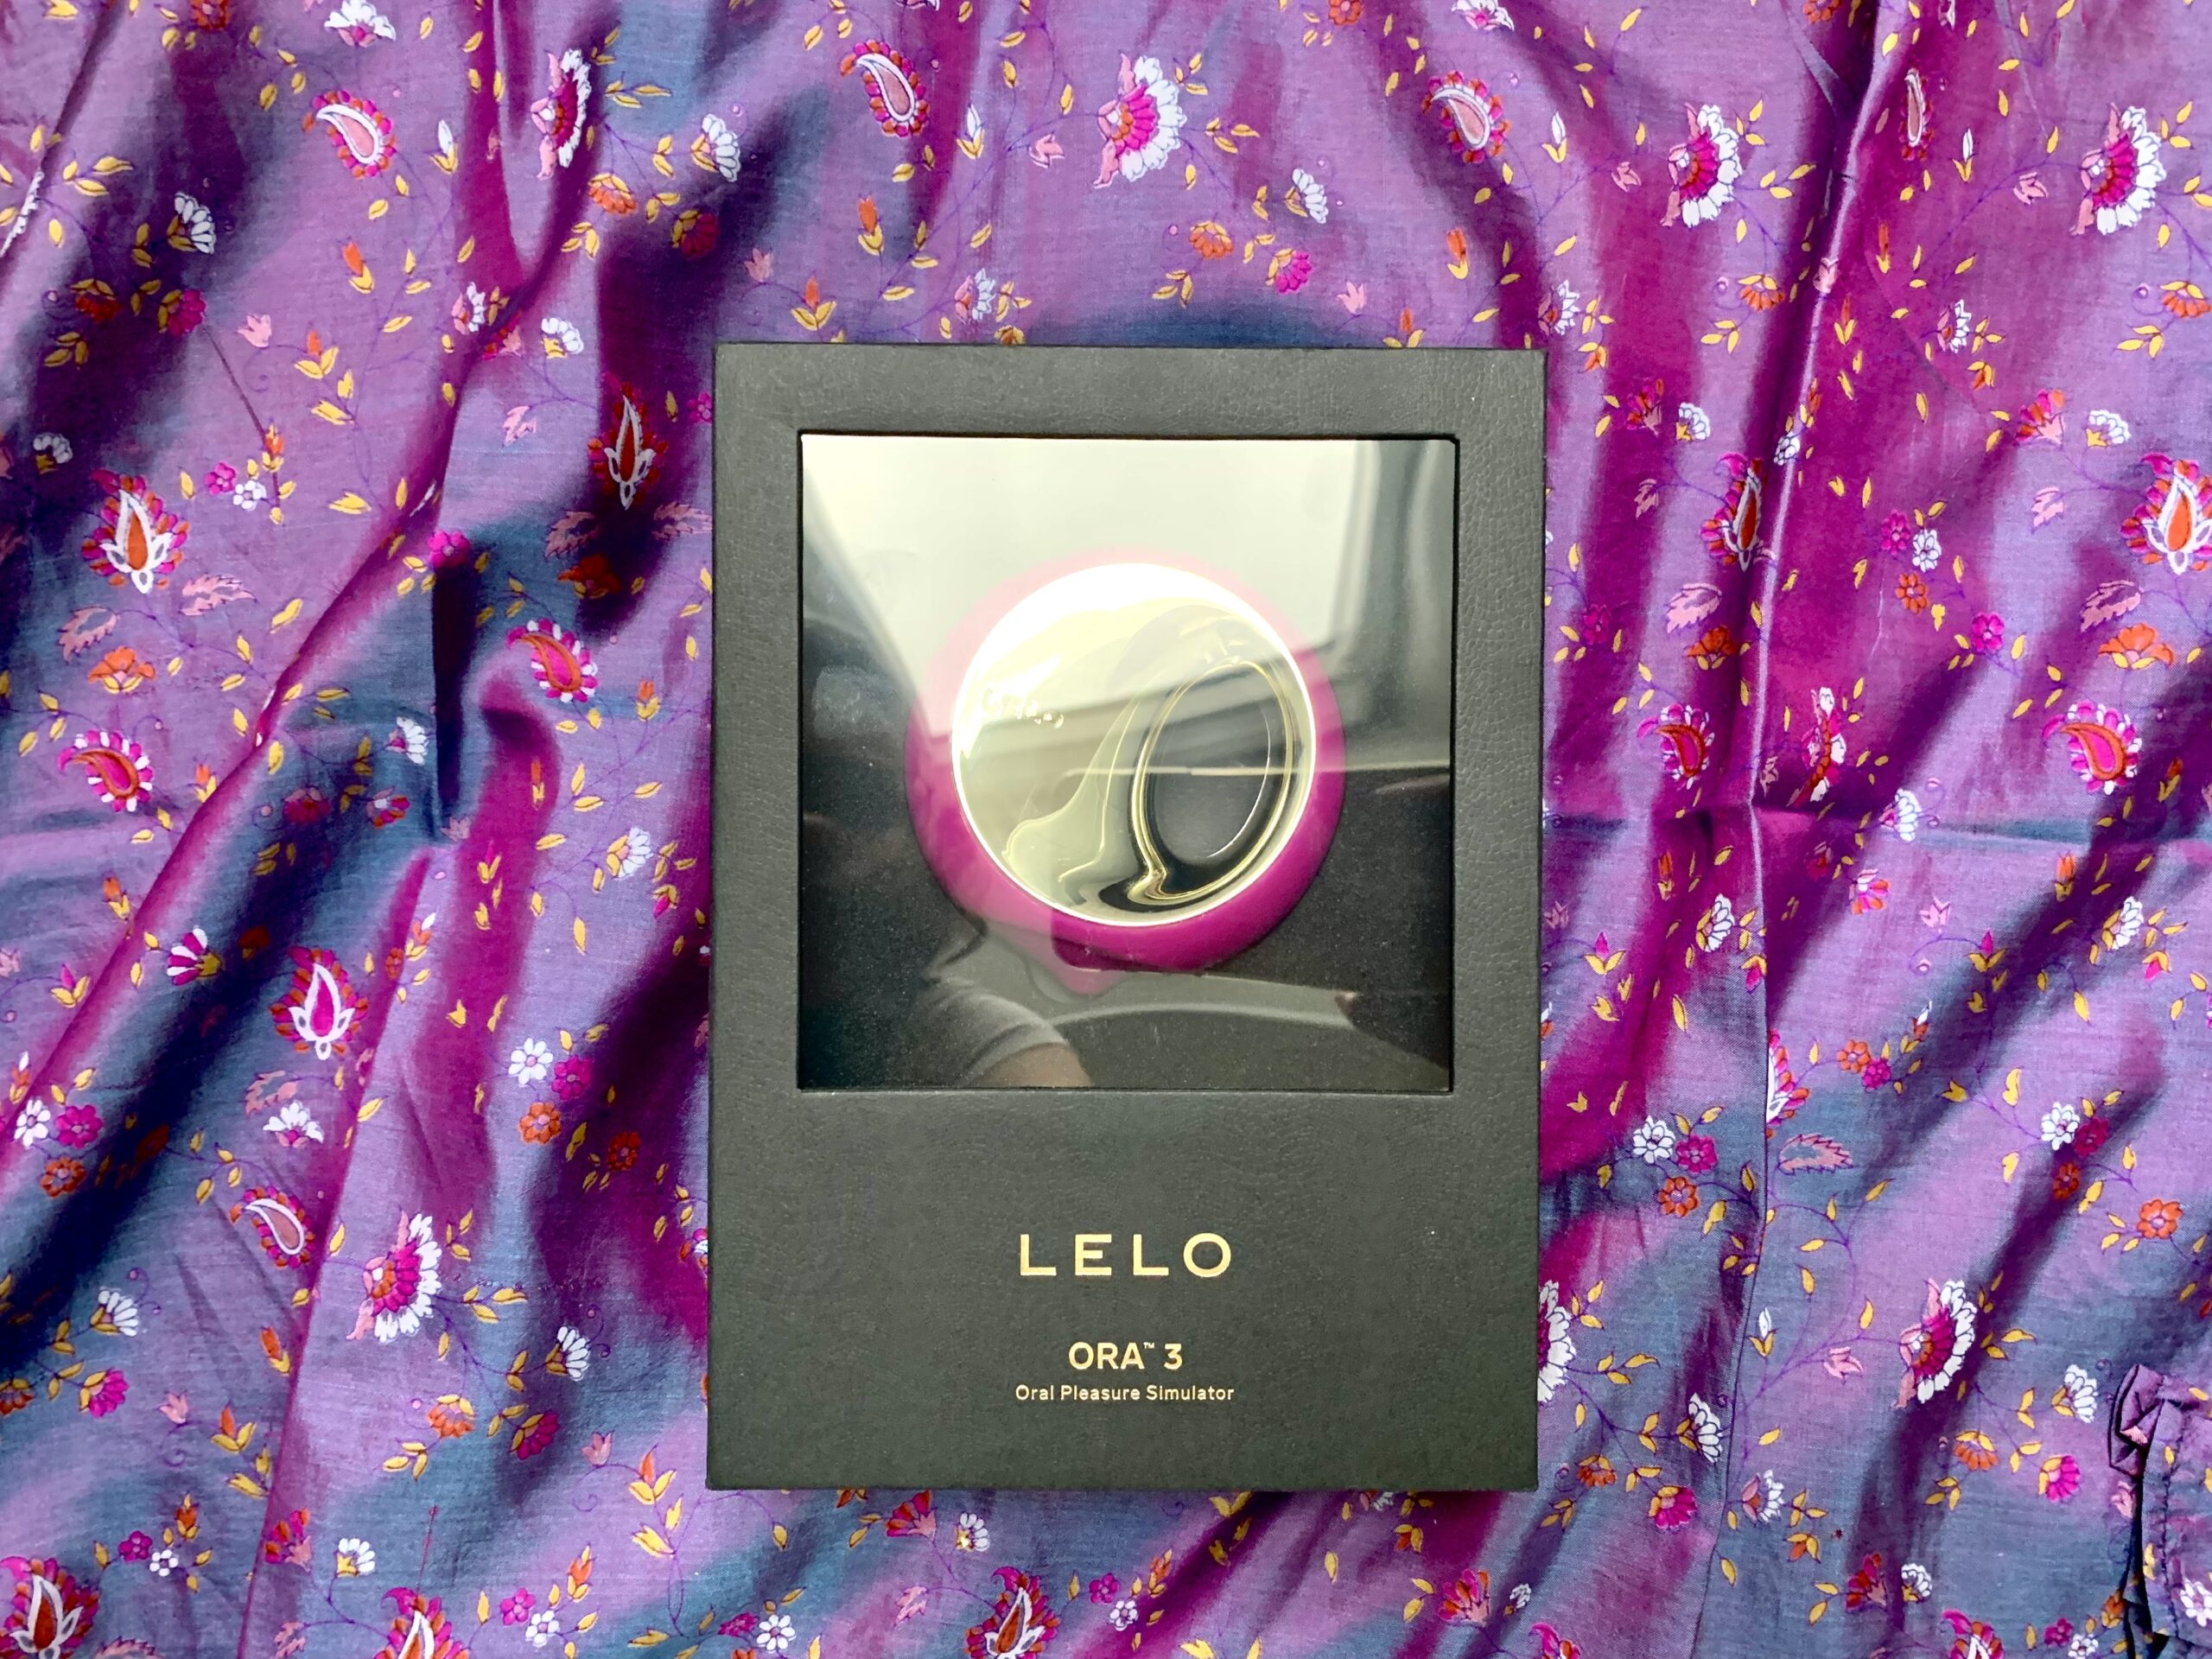 Lelo Ora 3 A Closer Look at the Lelo Ora 3’s Packaging